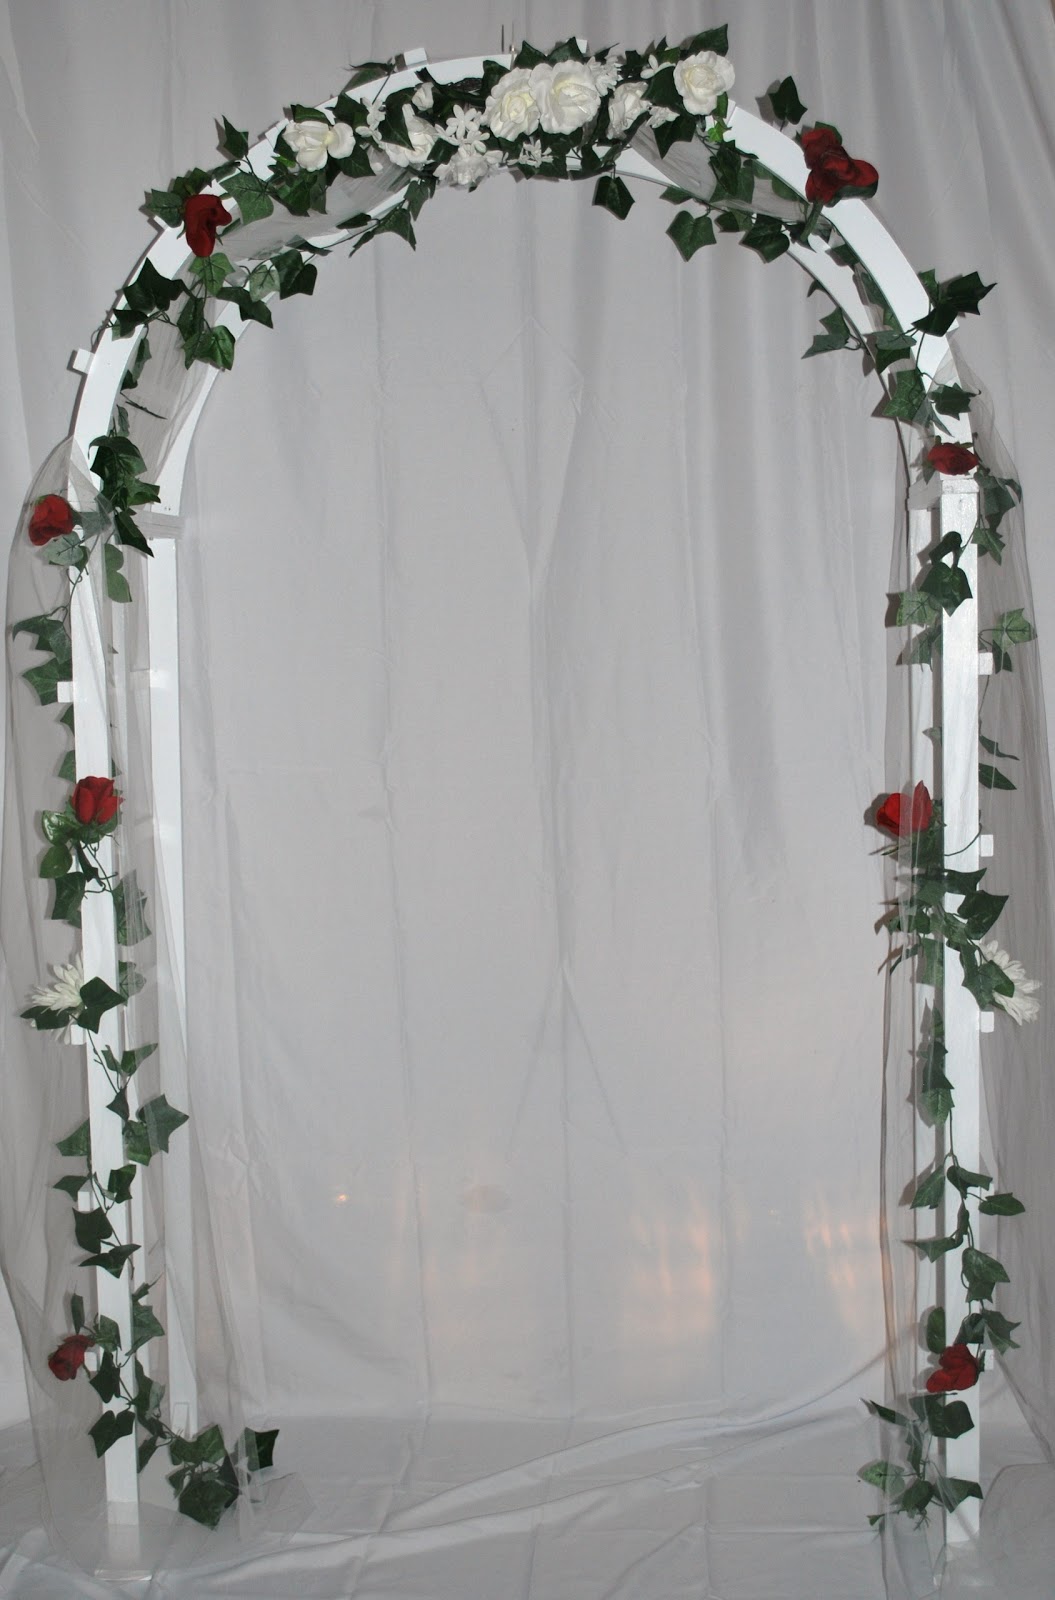 Decorated wedding arch made of